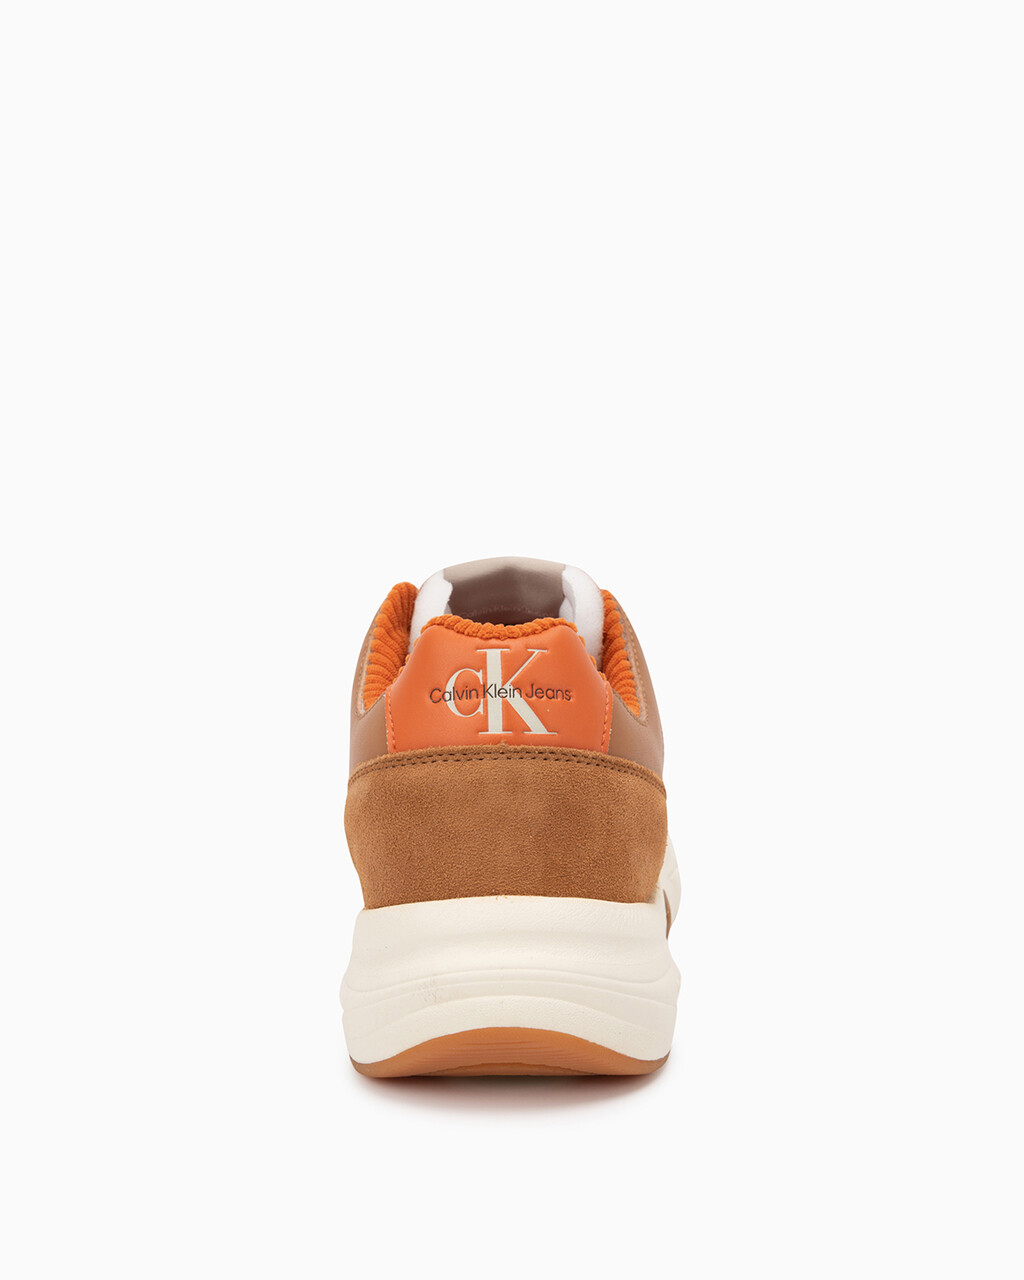 Leather Trainers, Plaza Taupe/Eggshell/Brown Sugar, hi-res